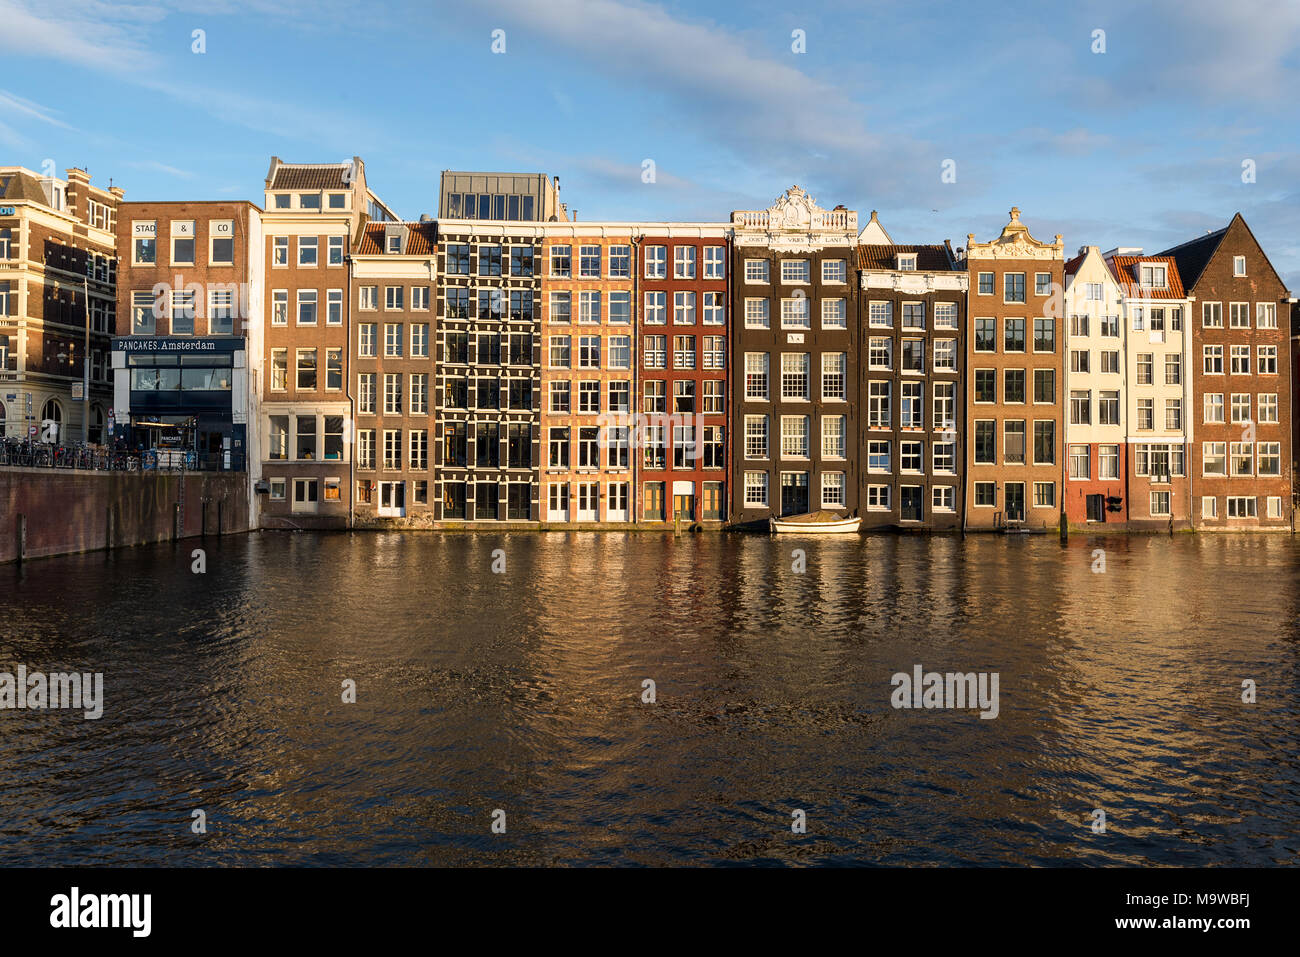 Historical old canal side houses off of Damrak, Amsterdam, Netherlands. Stock Photo